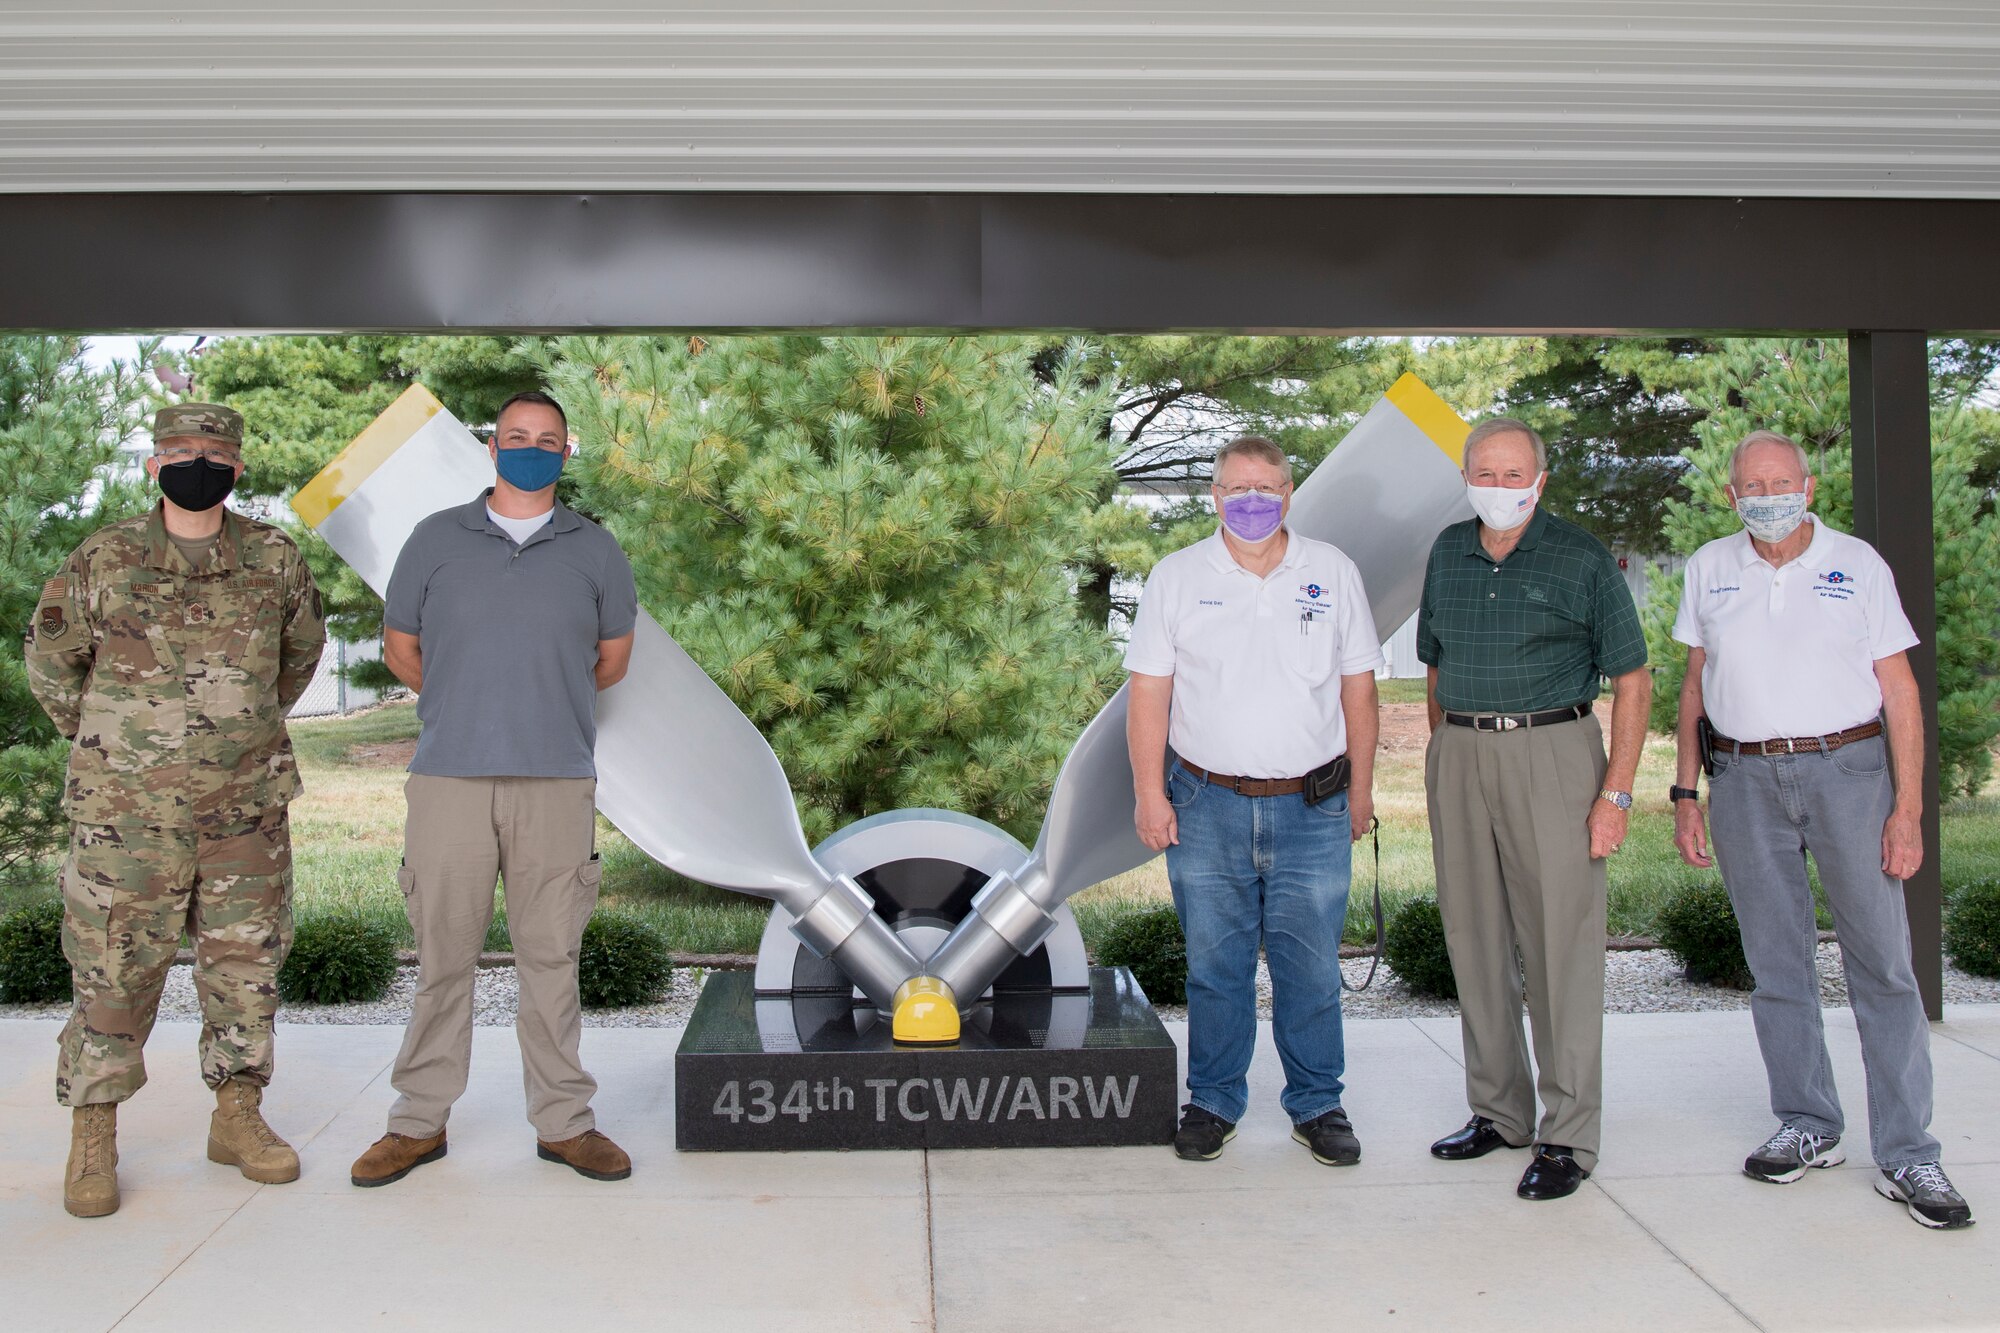 From the left, Chief Master Sgt. Wesley Marion, 434th Air Refueling Wing command chief, Brian Knowles, 434th ARW historian, pose for a photo with Atterbury-Bakalar Air Museum employees David Day, retired Air Force Maj. Gen. Mark Pillar, and Nick Firestone in front of the 434th monument at the museum in Columbus, Indiana, Sept. 17, 2020. Grissom personnel received a private tour of the facilities to learn more about the history and heritage of the 434th ARW. (U.S. Air Force photo/Master Sgt. Ben Mota)